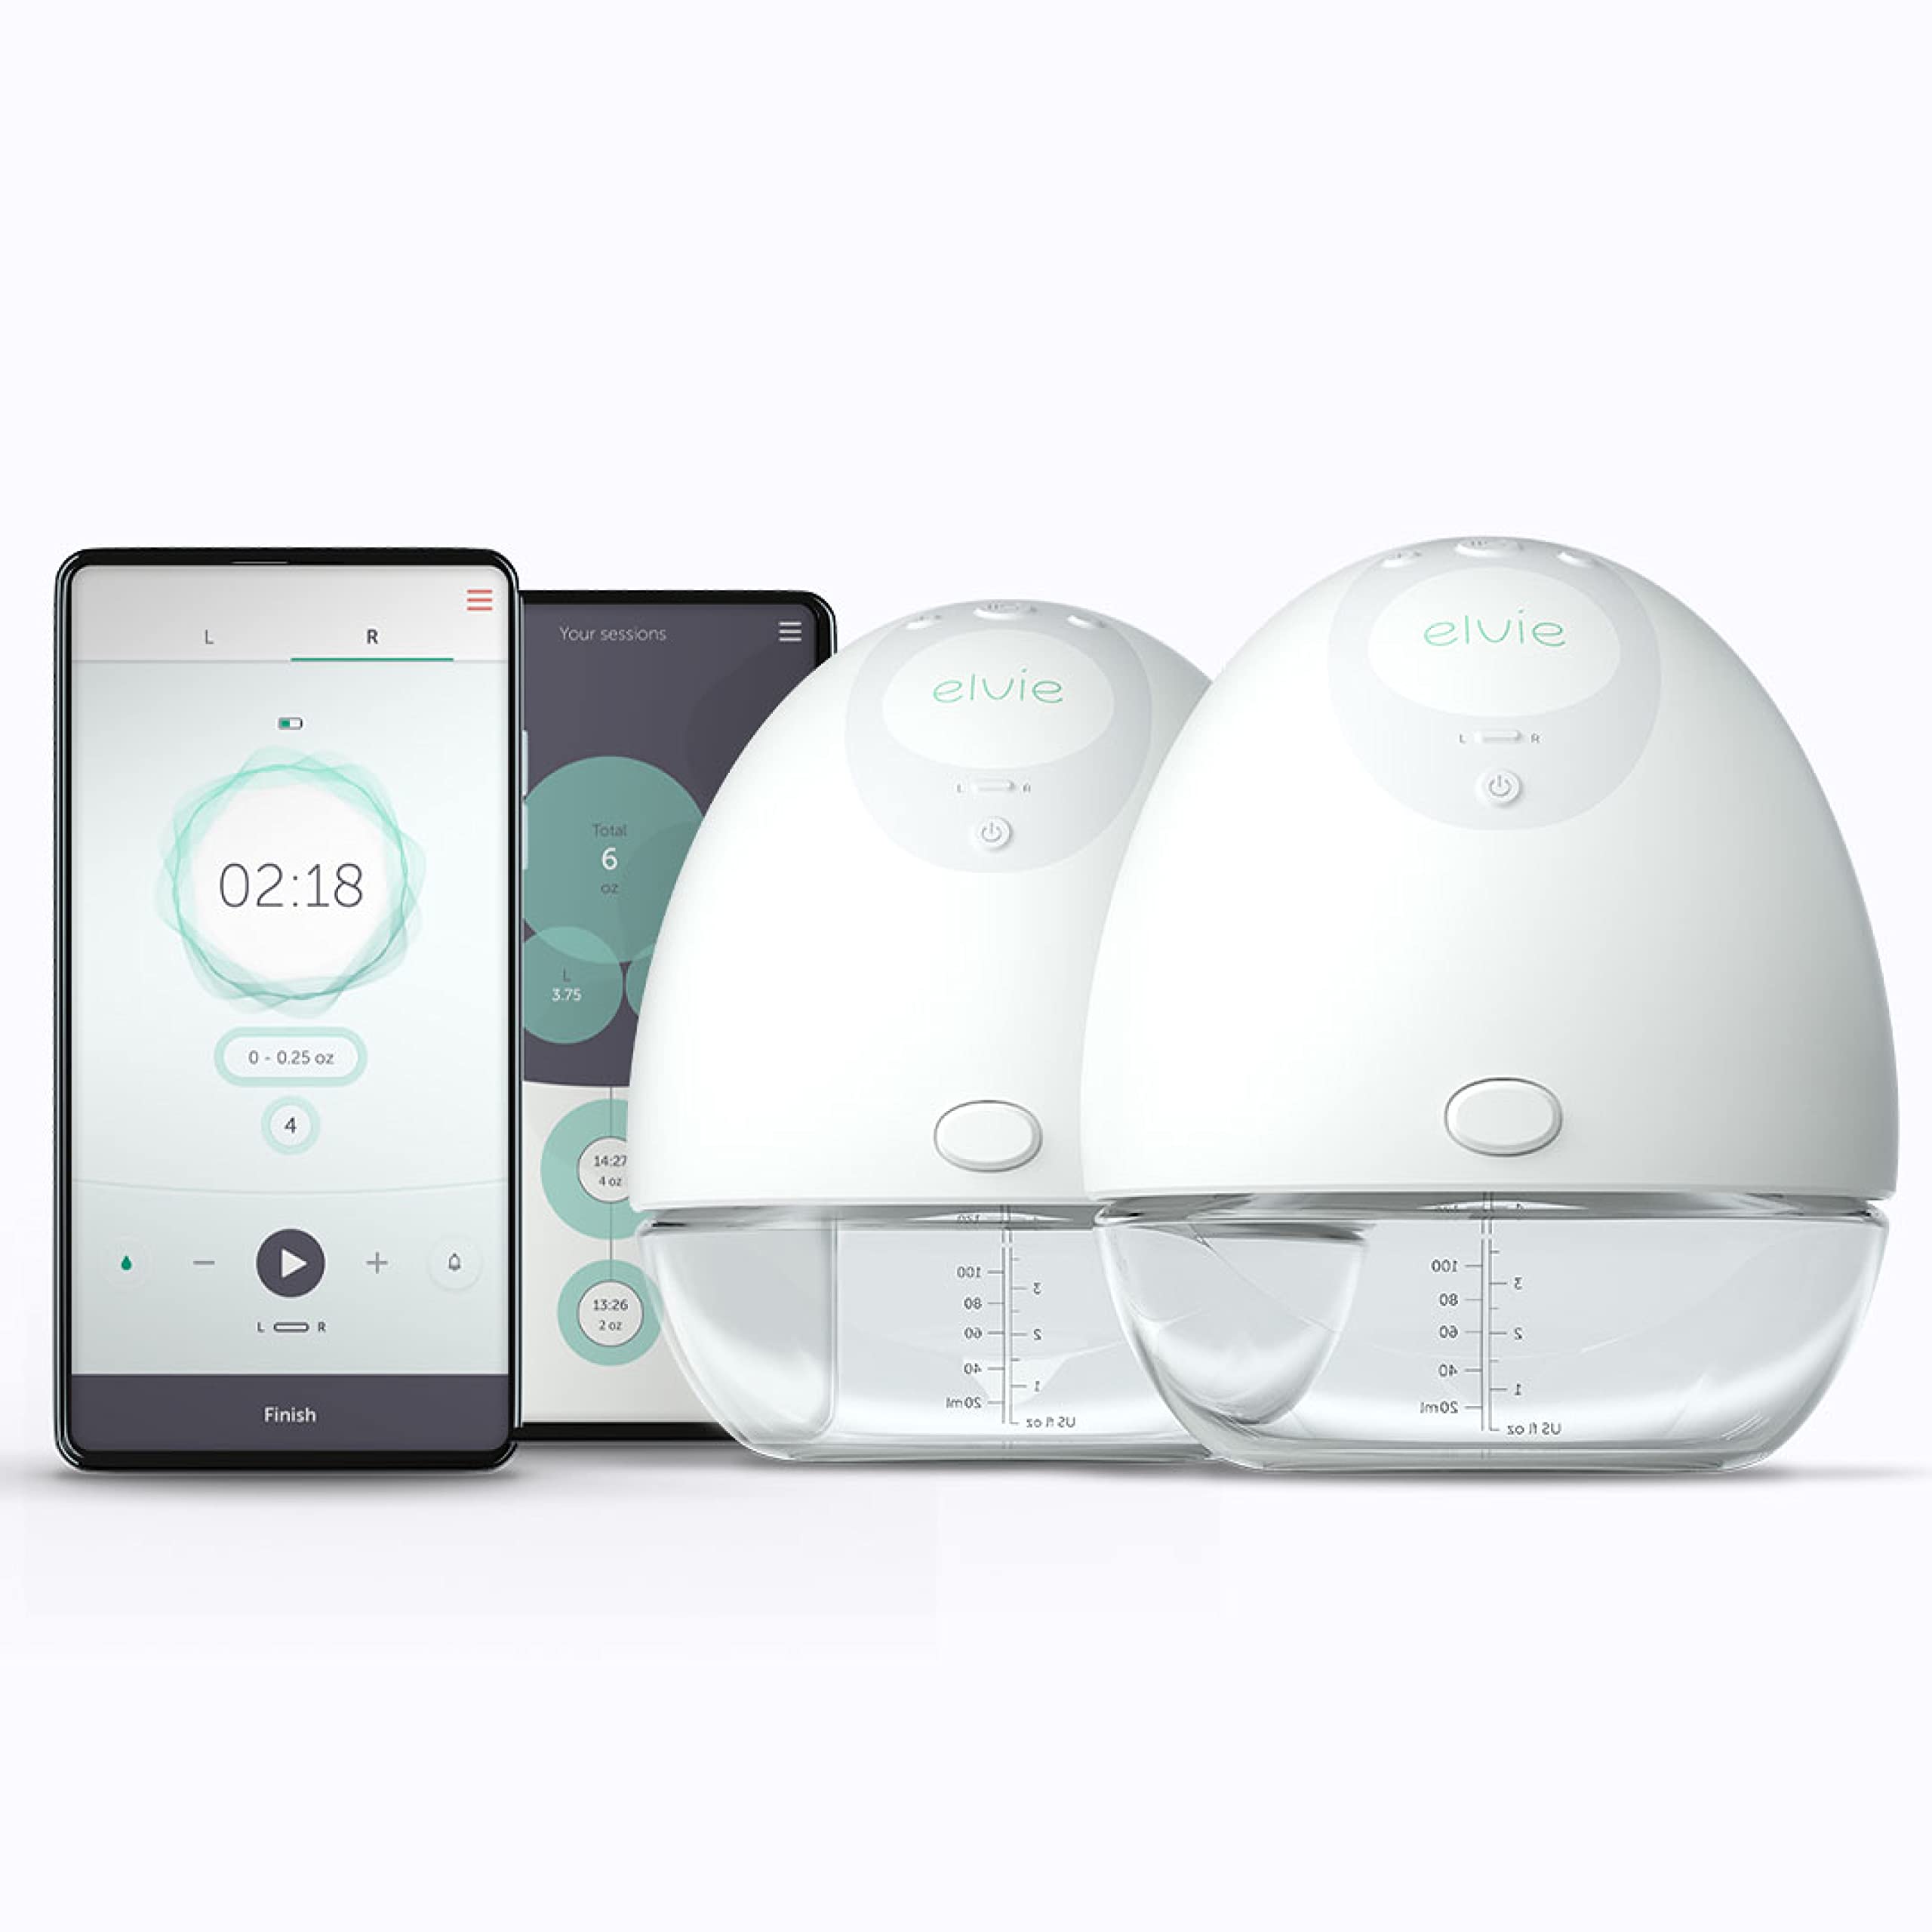 Elvie Breast Pump + Milk Collection Shells - Double, Wearable Breast Pump with App - The Smallest, Quietest Electric Breast Pump - Portable Breast Pumps Hands Free & Discreet